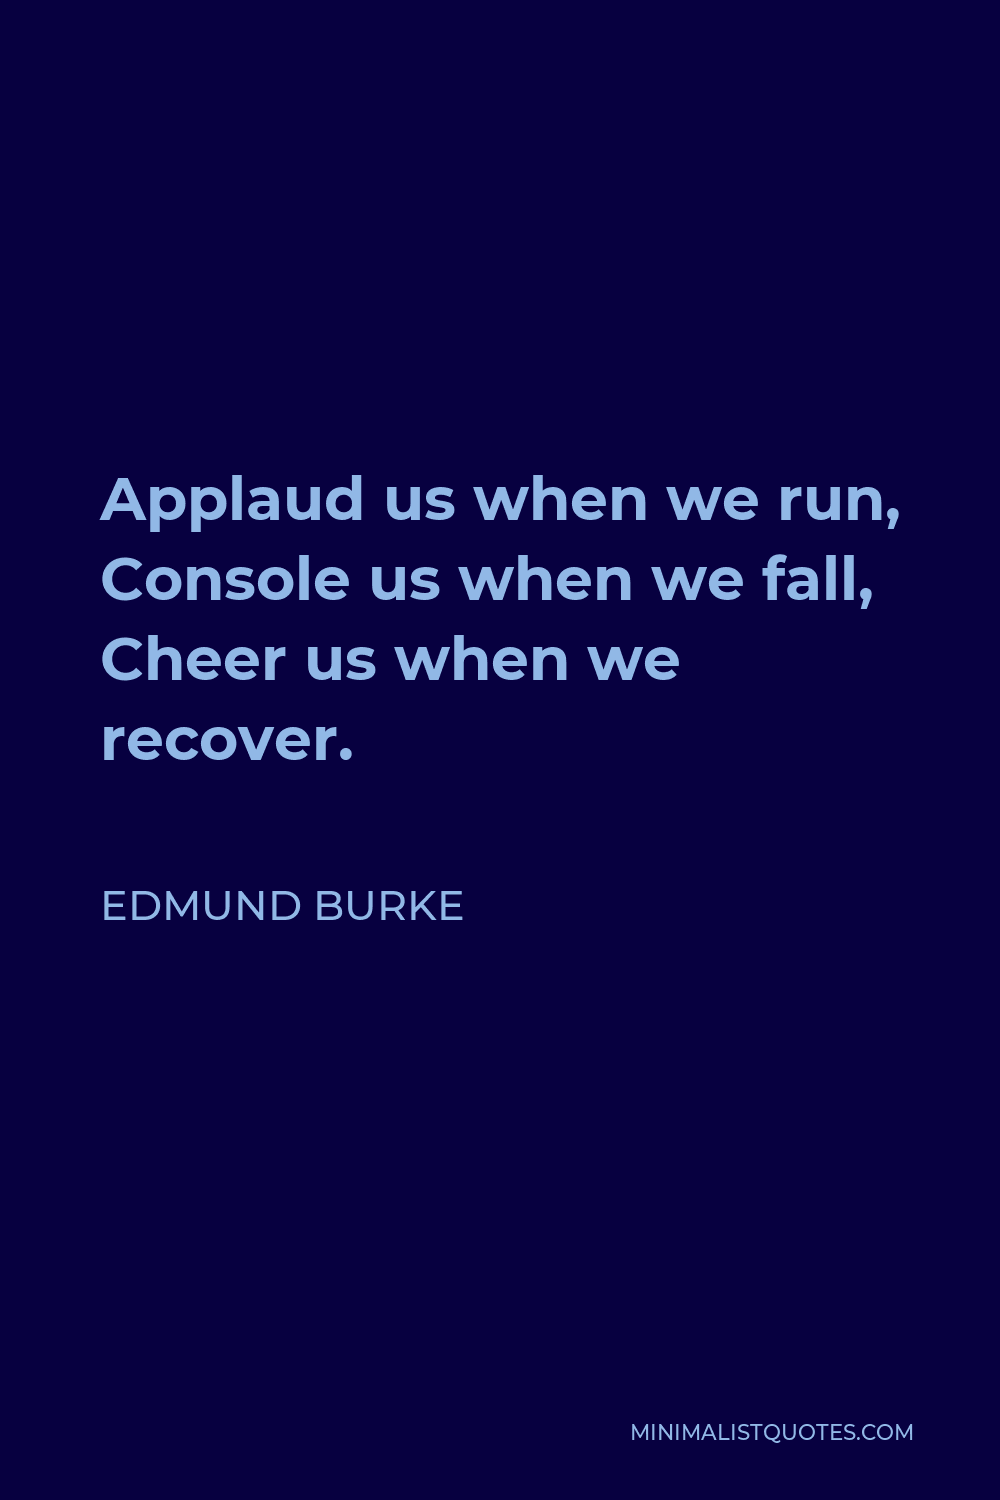 Edmund Burke Quote - Applaud us when we run, Console us when we fall, Cheer us when we recover.